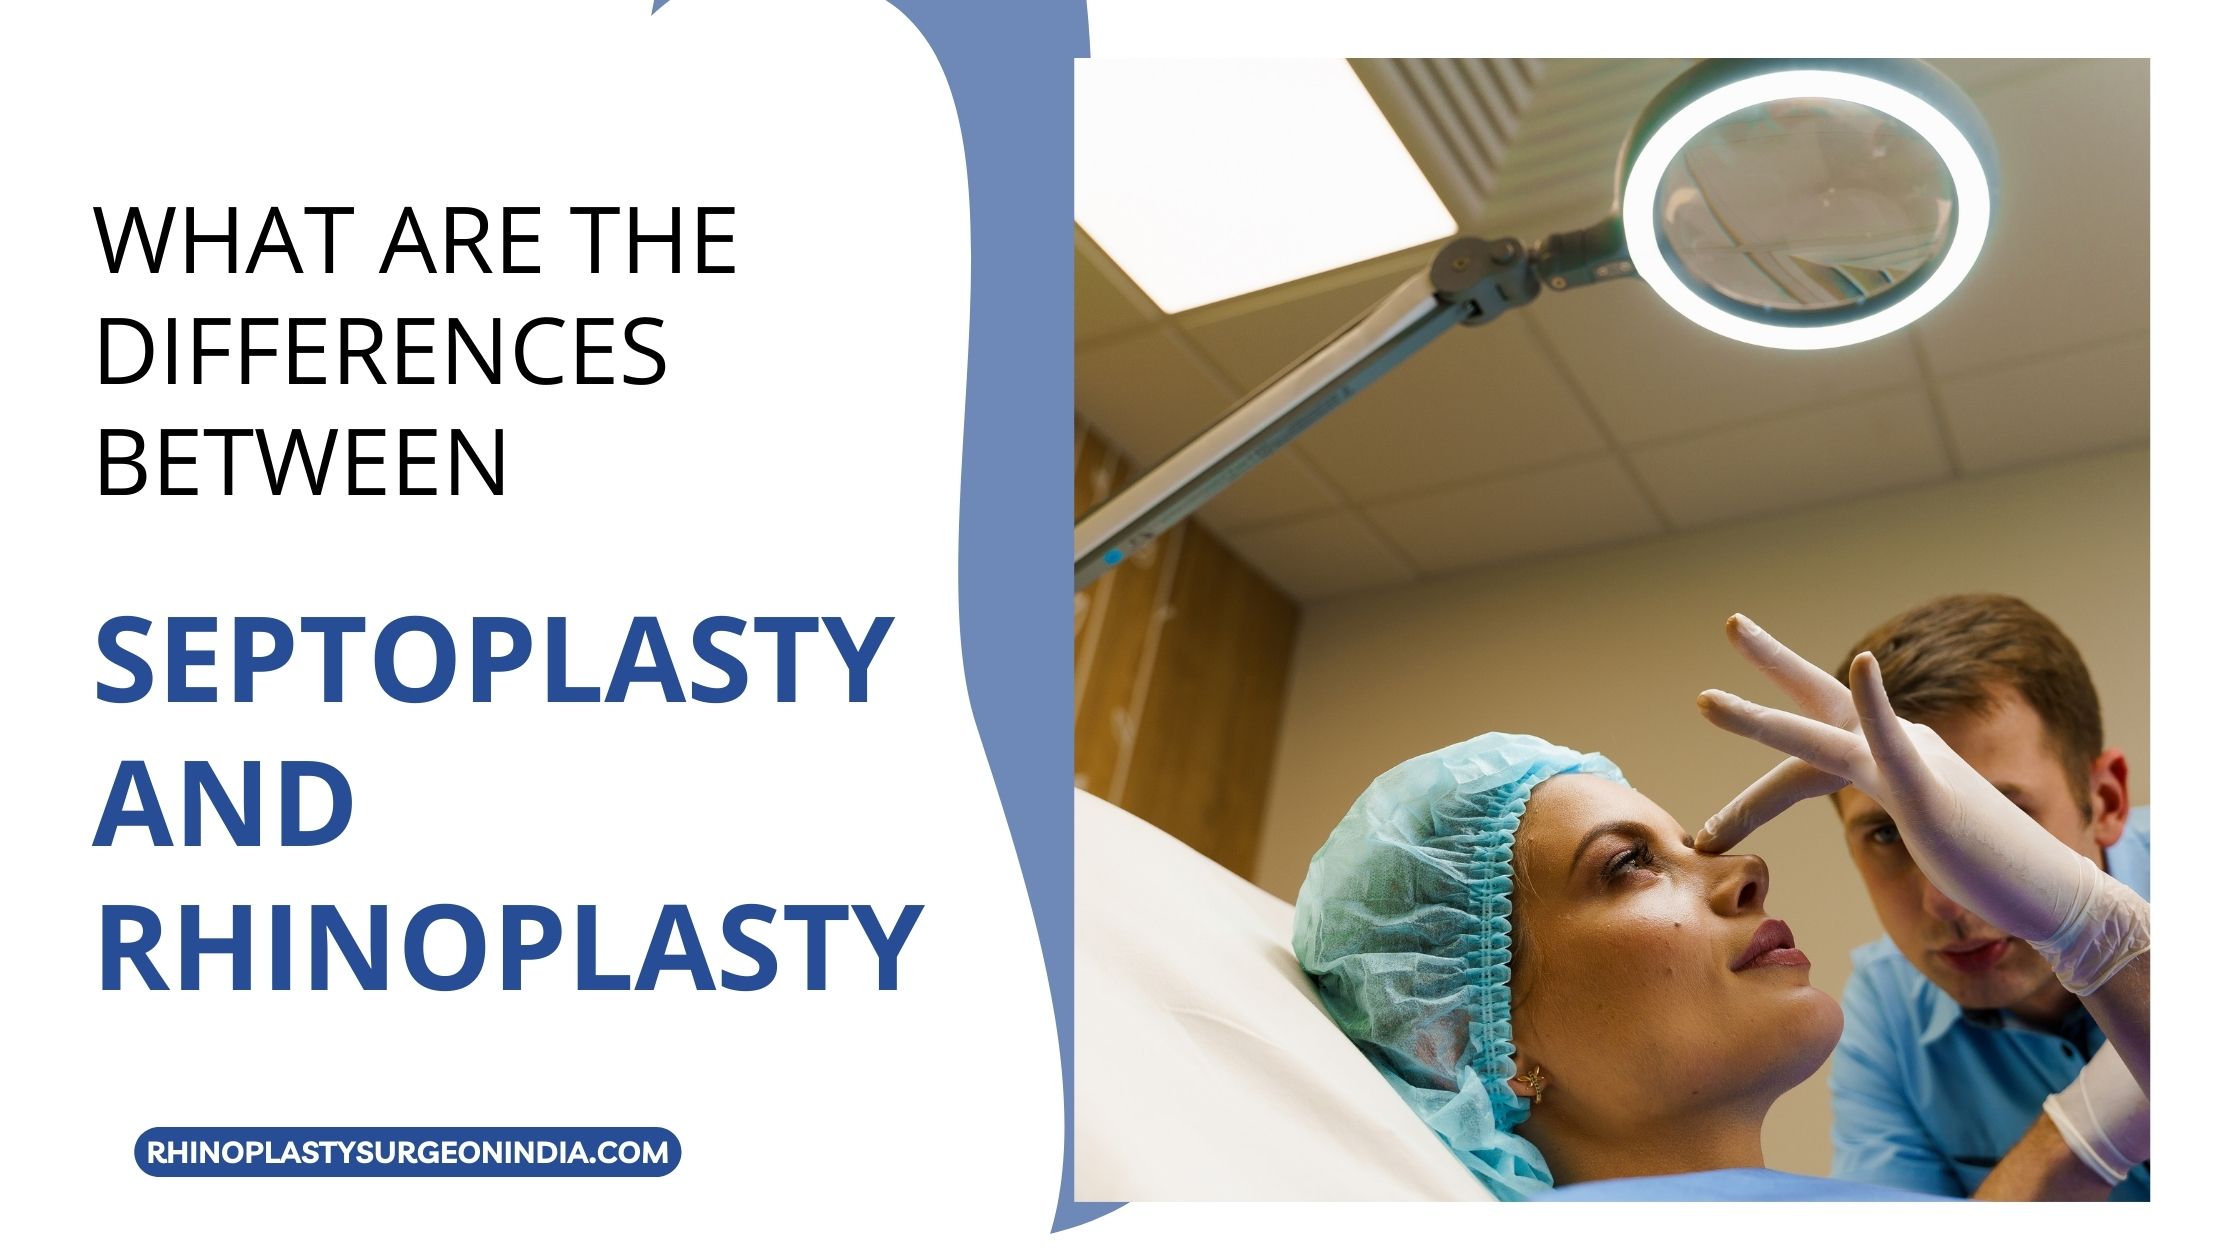 Know the Difference Between Rhinoplasty and Septoplasty?